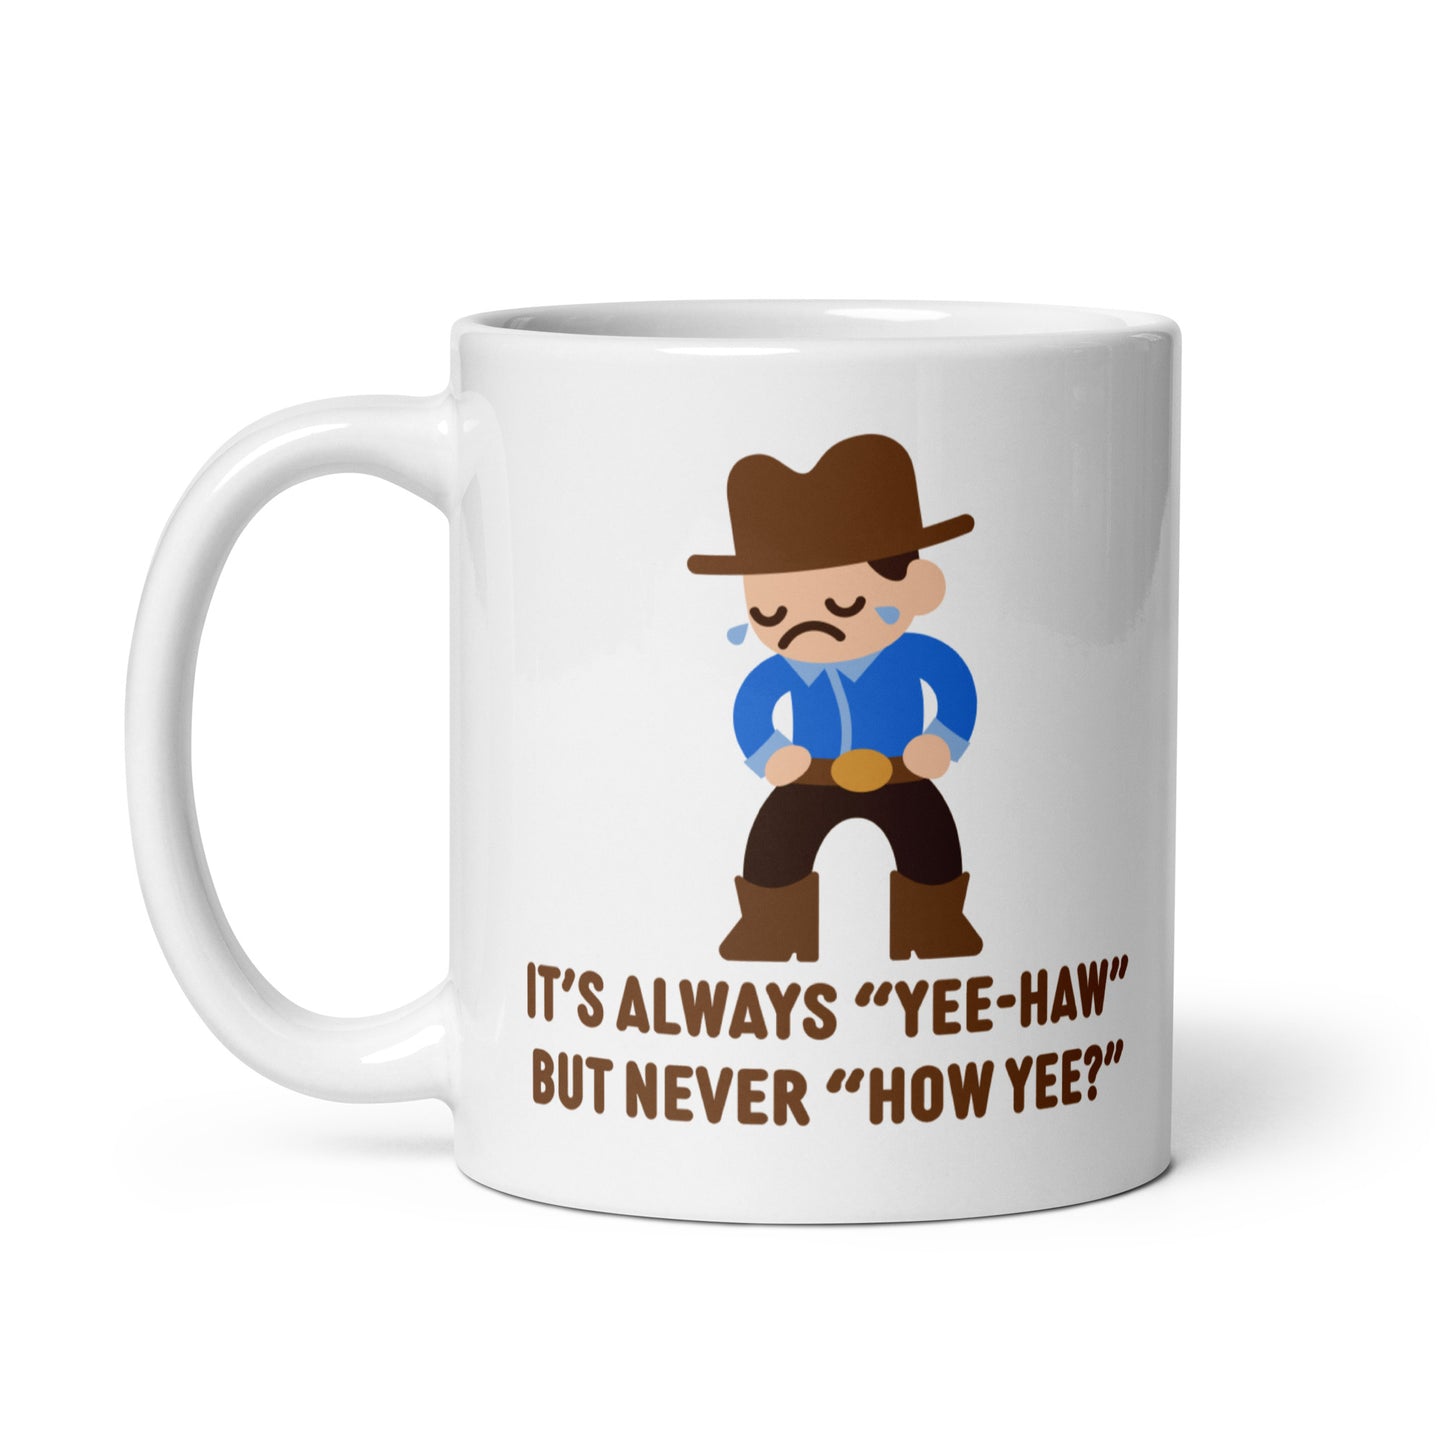 A white 11 ounce ceramic coffee mug featuring an illustration of a crying cowboy wearing a blue shirt. Text below the cowboy reads "It's always "yee-haw" but never "How yee?""